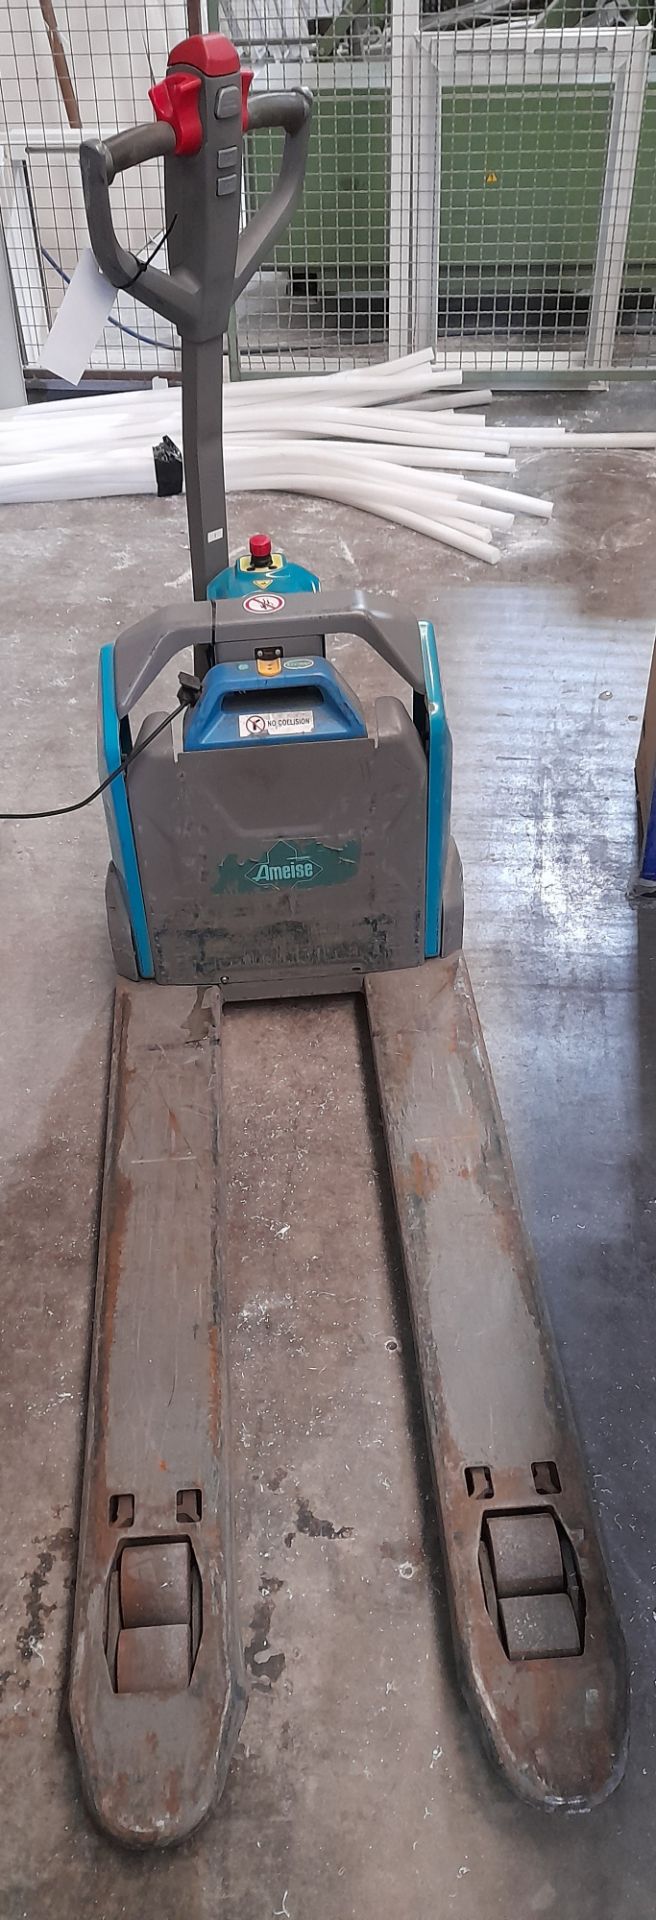 Ameise PTE1.5 Li-Ion electric pedestrian pallet truck, 1500KG capacity, YOM 2020, with SANS SSLC 300 - Image 2 of 5